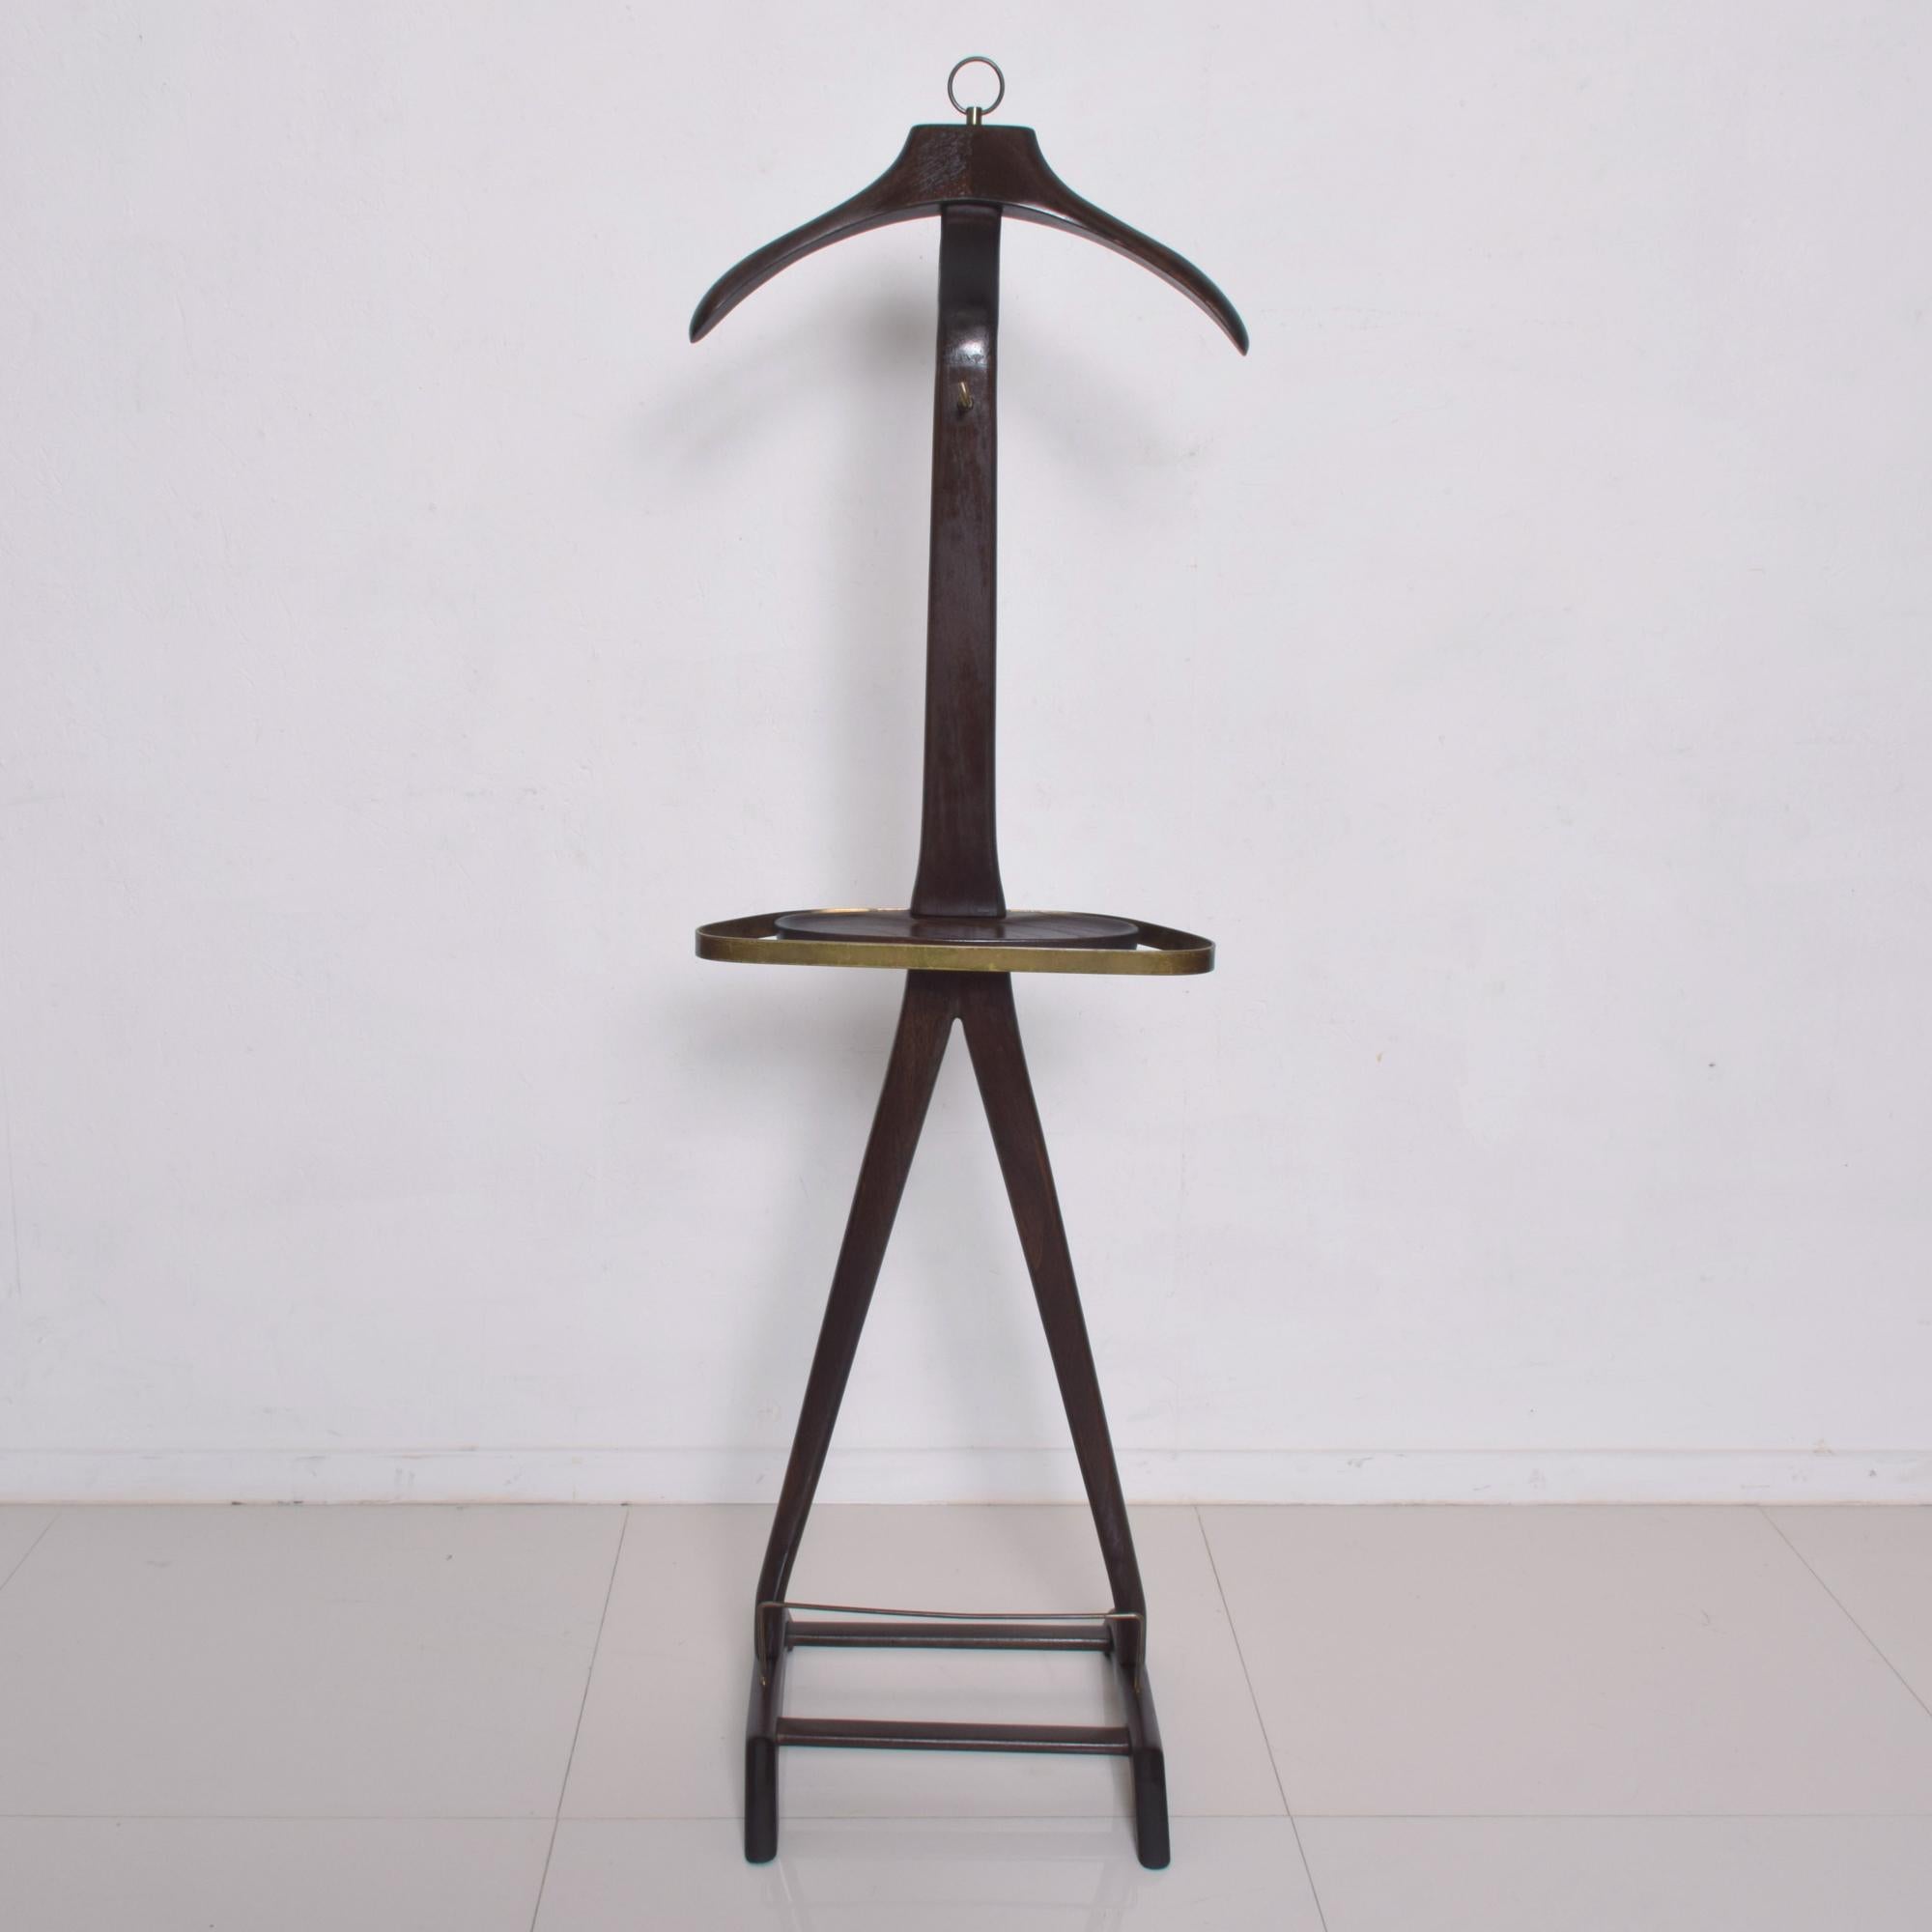 Sculpted Modern Italian Mahogany Gentleman's Valet Stand with Valet catchall tray Italy 1950s designed by Ico Parisi for Fratelli Reguitti 
No mark is present from the maker.
Made in Italy circa the 1950s 
Stylish Sculptural design in Mahogany wood